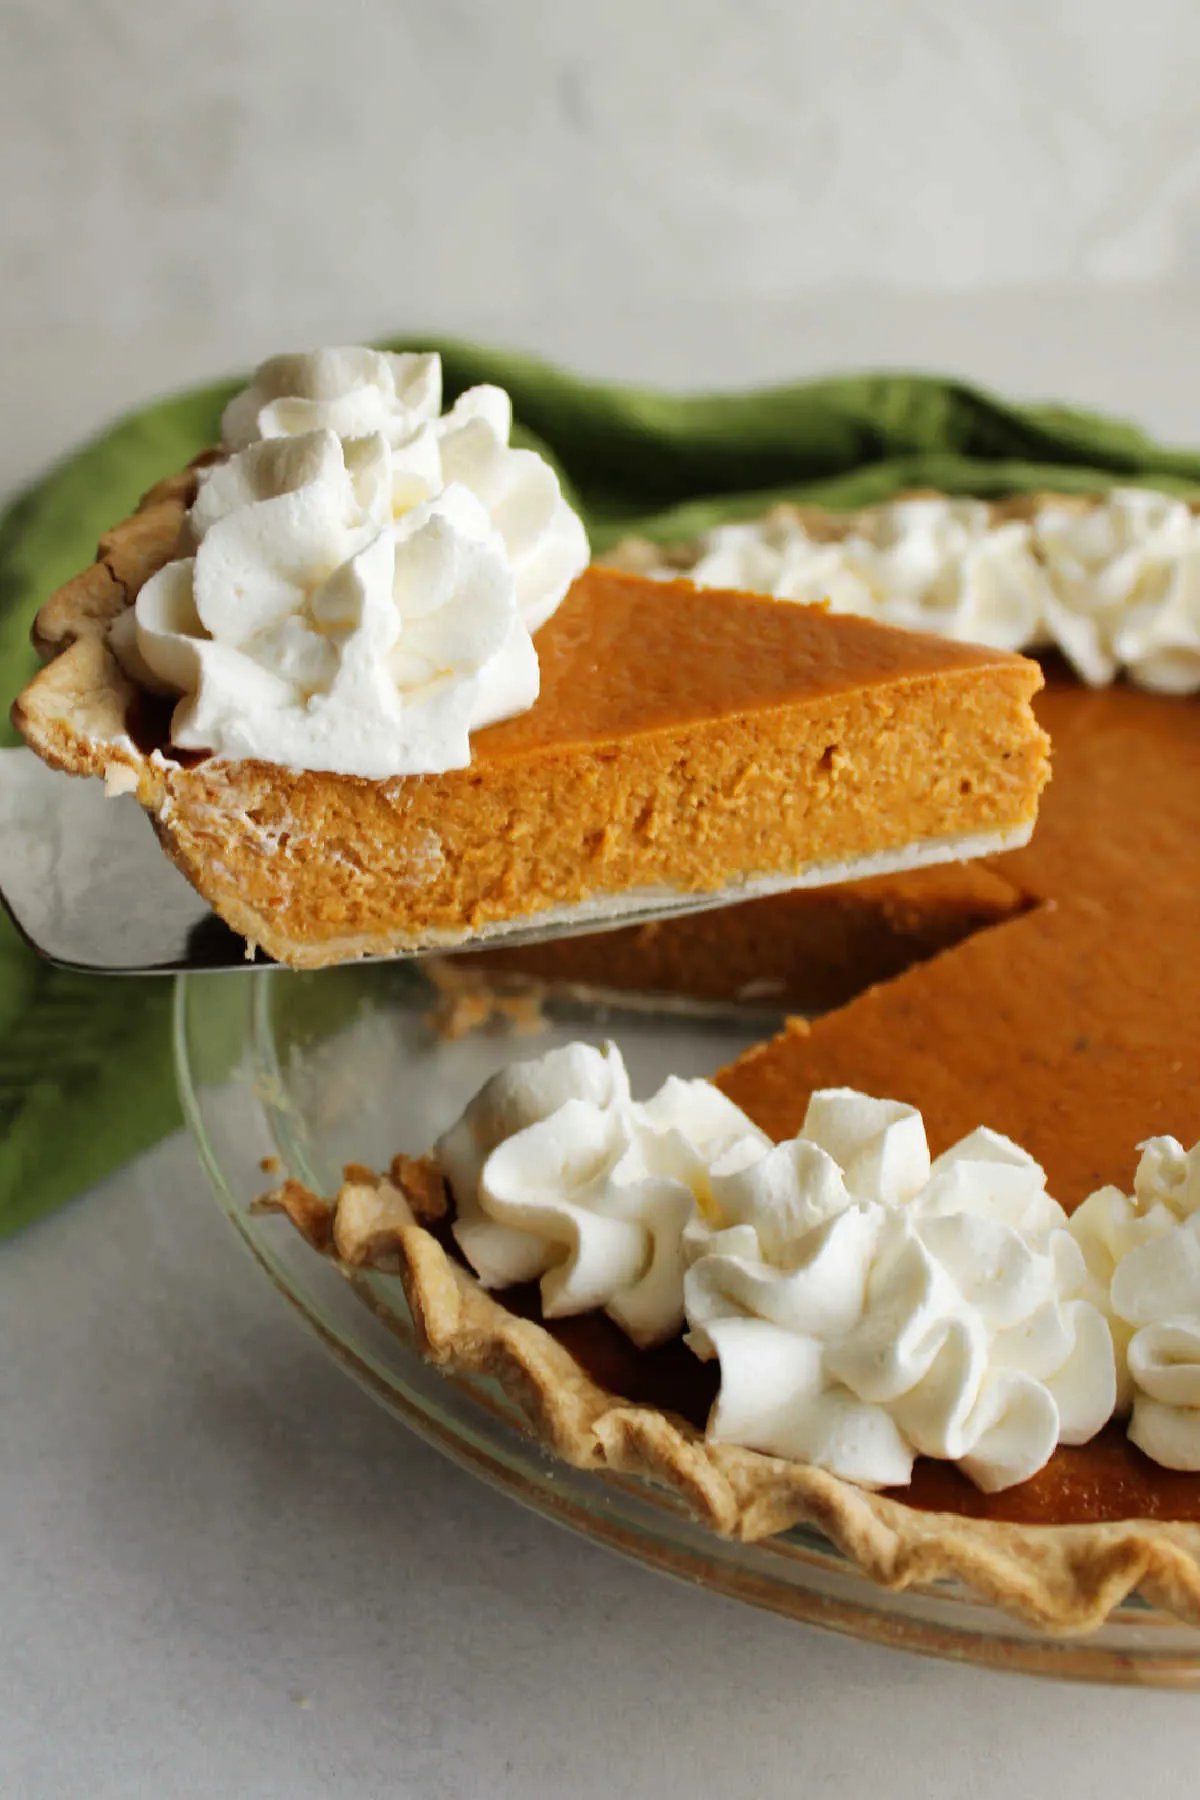 Lifting a slice of pumpkin pie out of the whole pie, showing the smooth custardy filling and whipped cream topping.